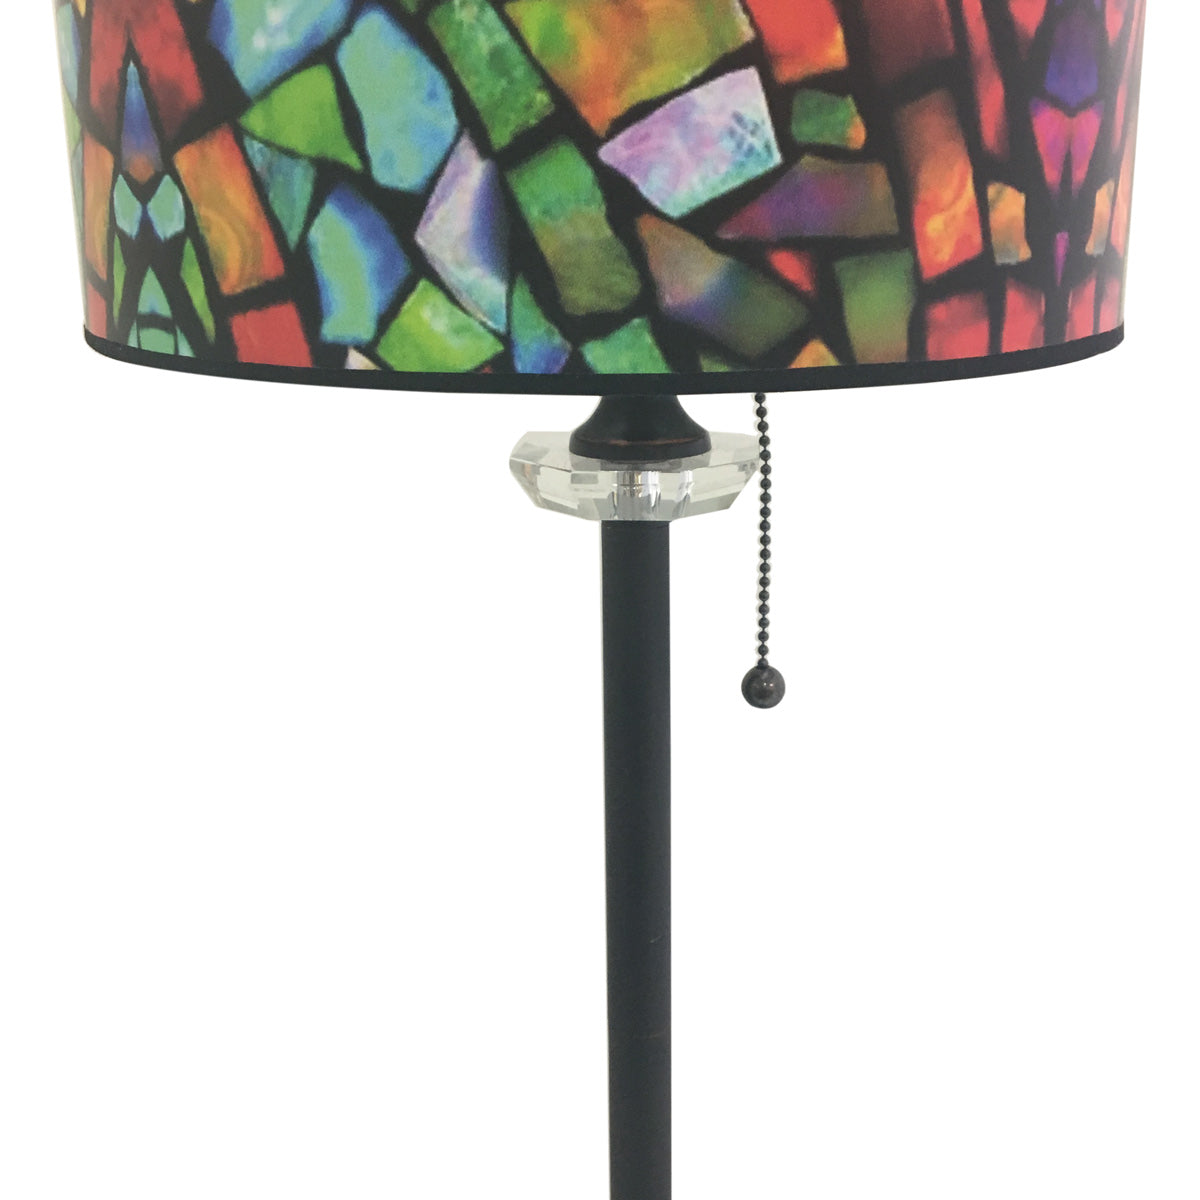 Royal Designs 28" Crystal and Oil Rub Bronze Buffet Lamp with Mosaic Stained Glass Design Hardback Lamp Shade, Set of 2